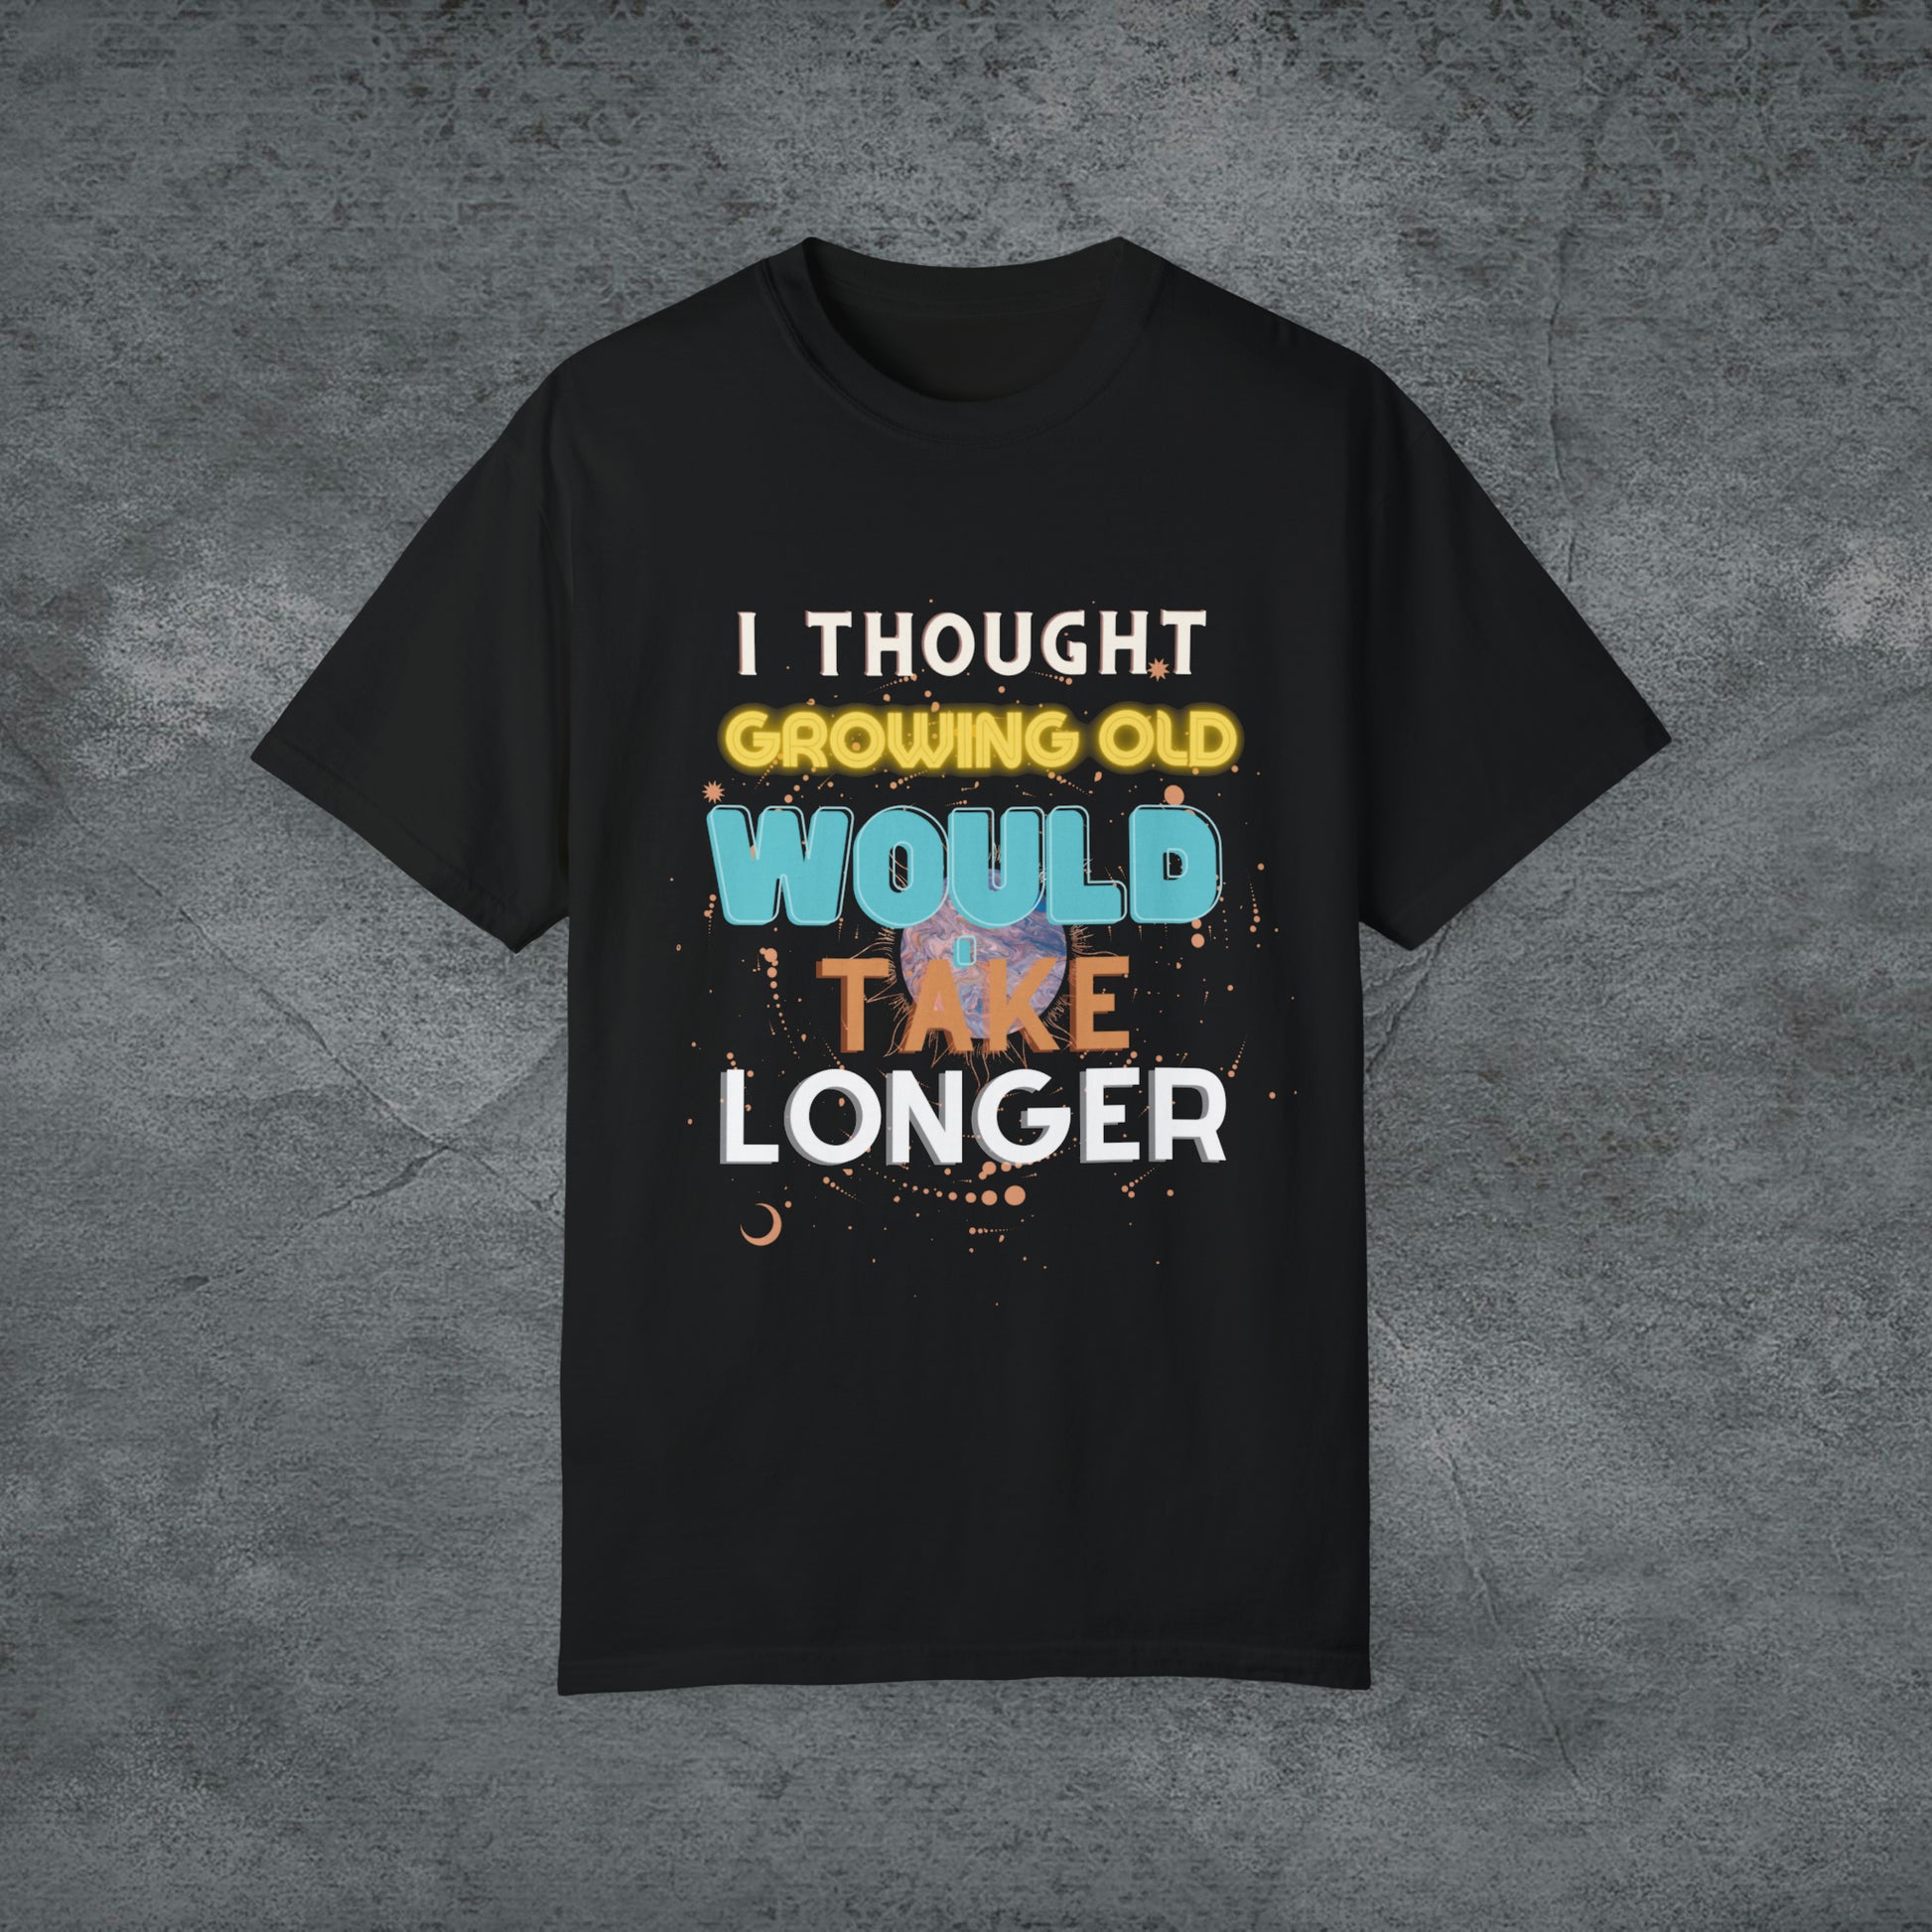 I Thought Growing Old Would Take Longer T-Shirt | Getting Older T Shirt | Funny Adulting T-Shirt | Old Age T Shirt | Old Person T Shirt T-Shirt Black S 